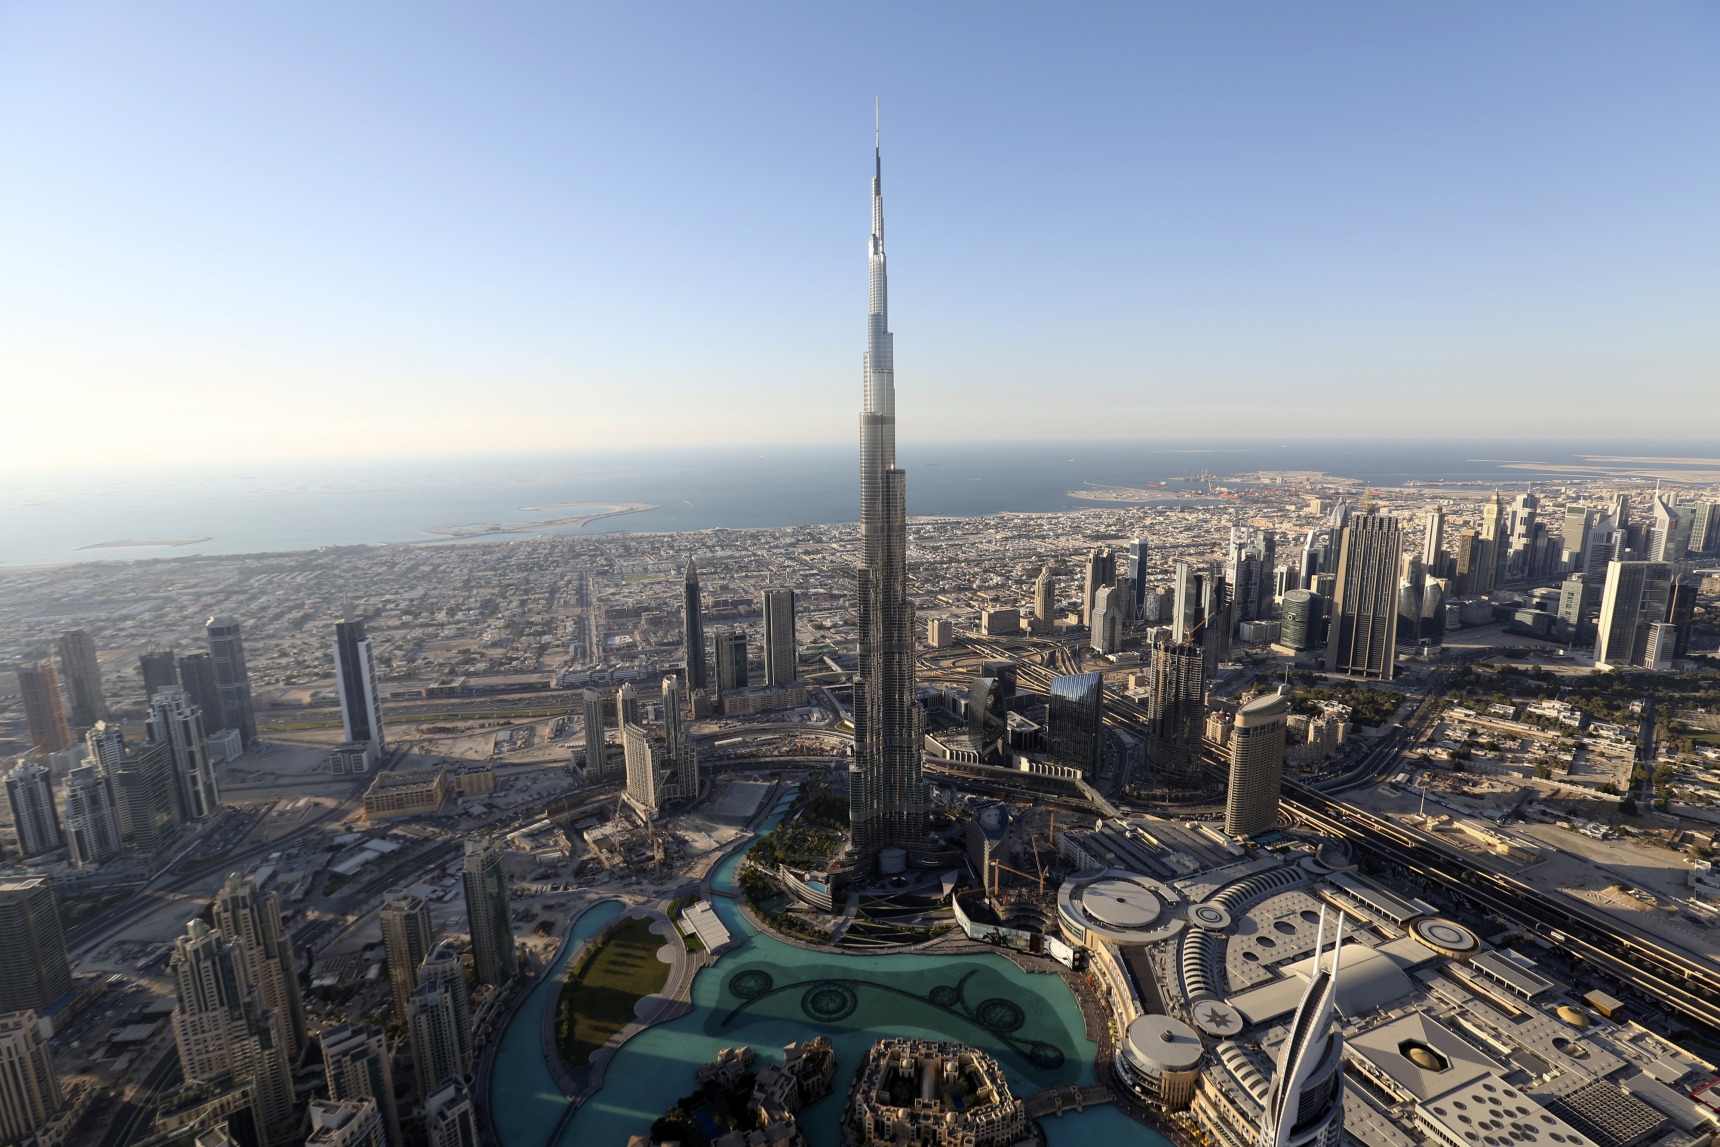 The Burj Khalifa tower, center, stands surrounded by other skyscrapers in this aerial view of the city skyline in Dubai.